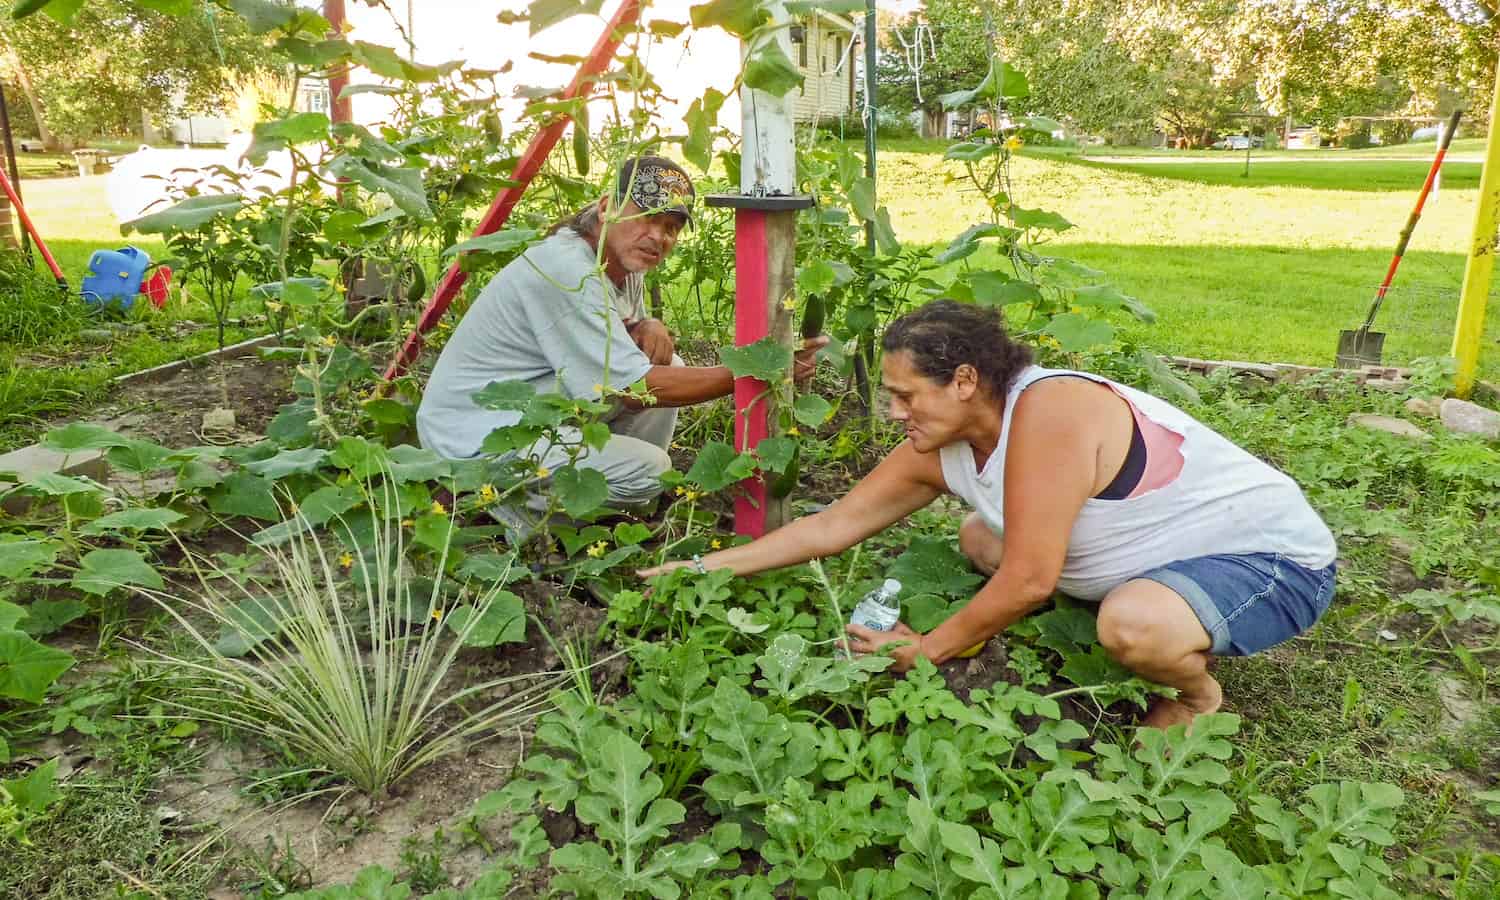 The Santee Sioux community wishes to revitalize and strengthen traditional food and agriculture practices to create a self-sufficient food system.